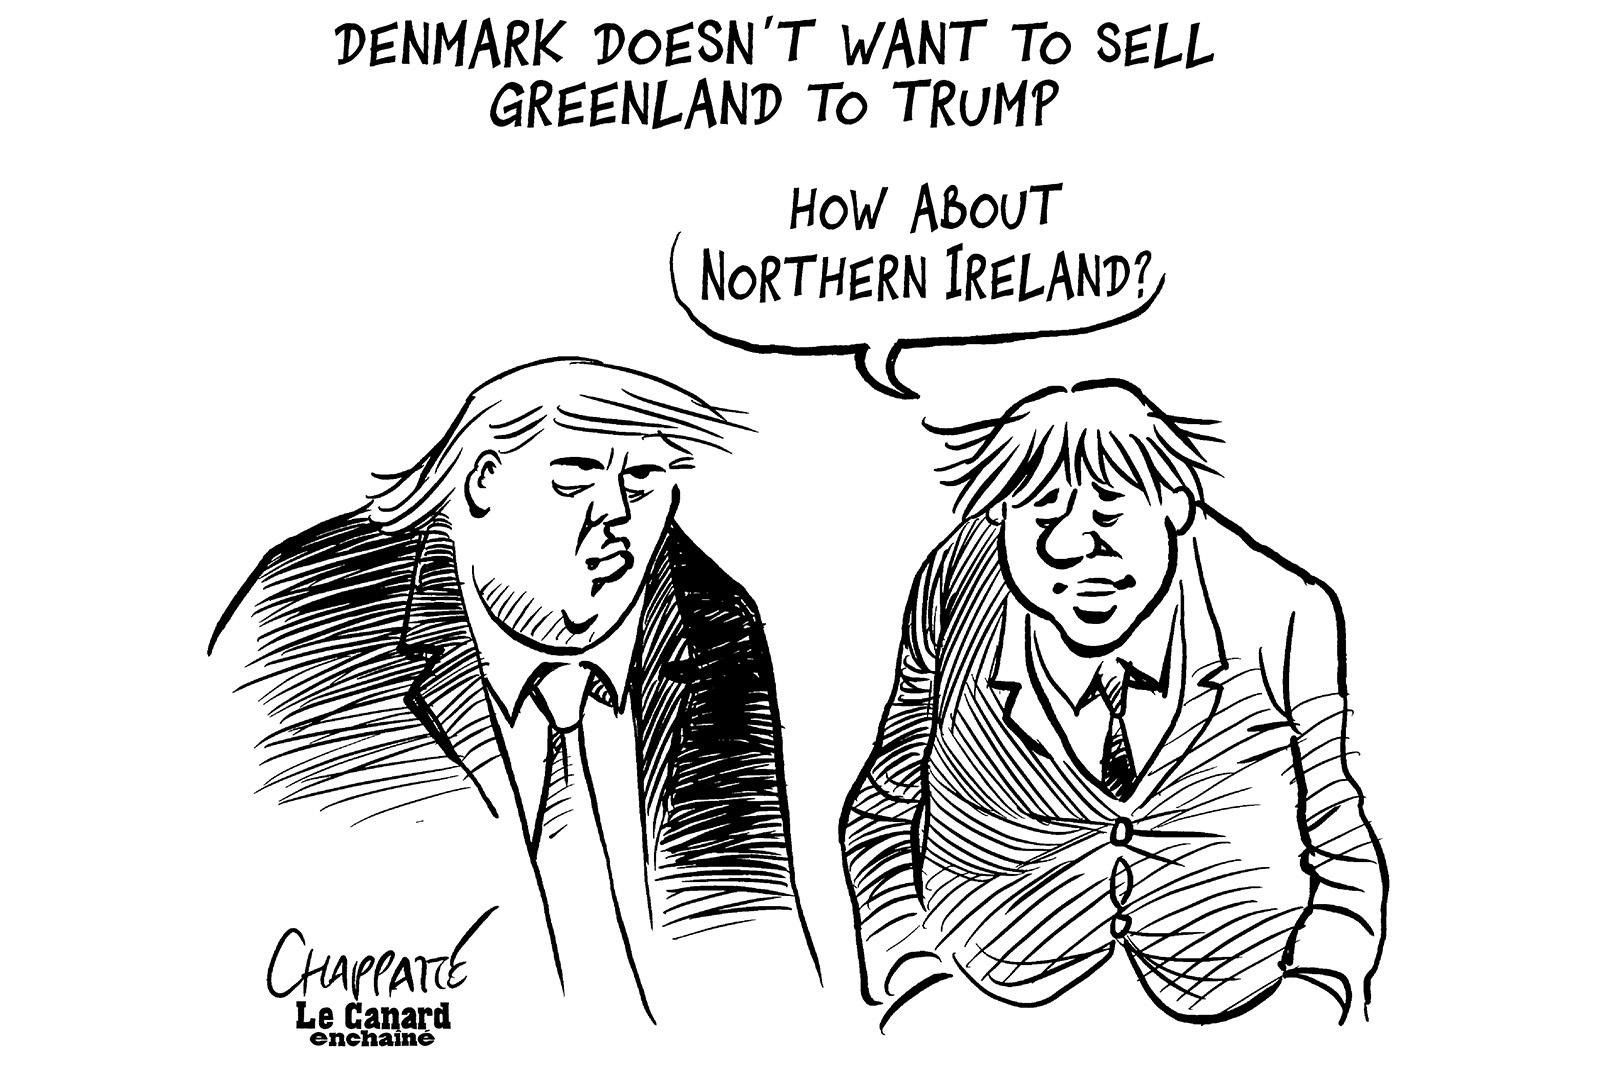 Greenland is not for sale